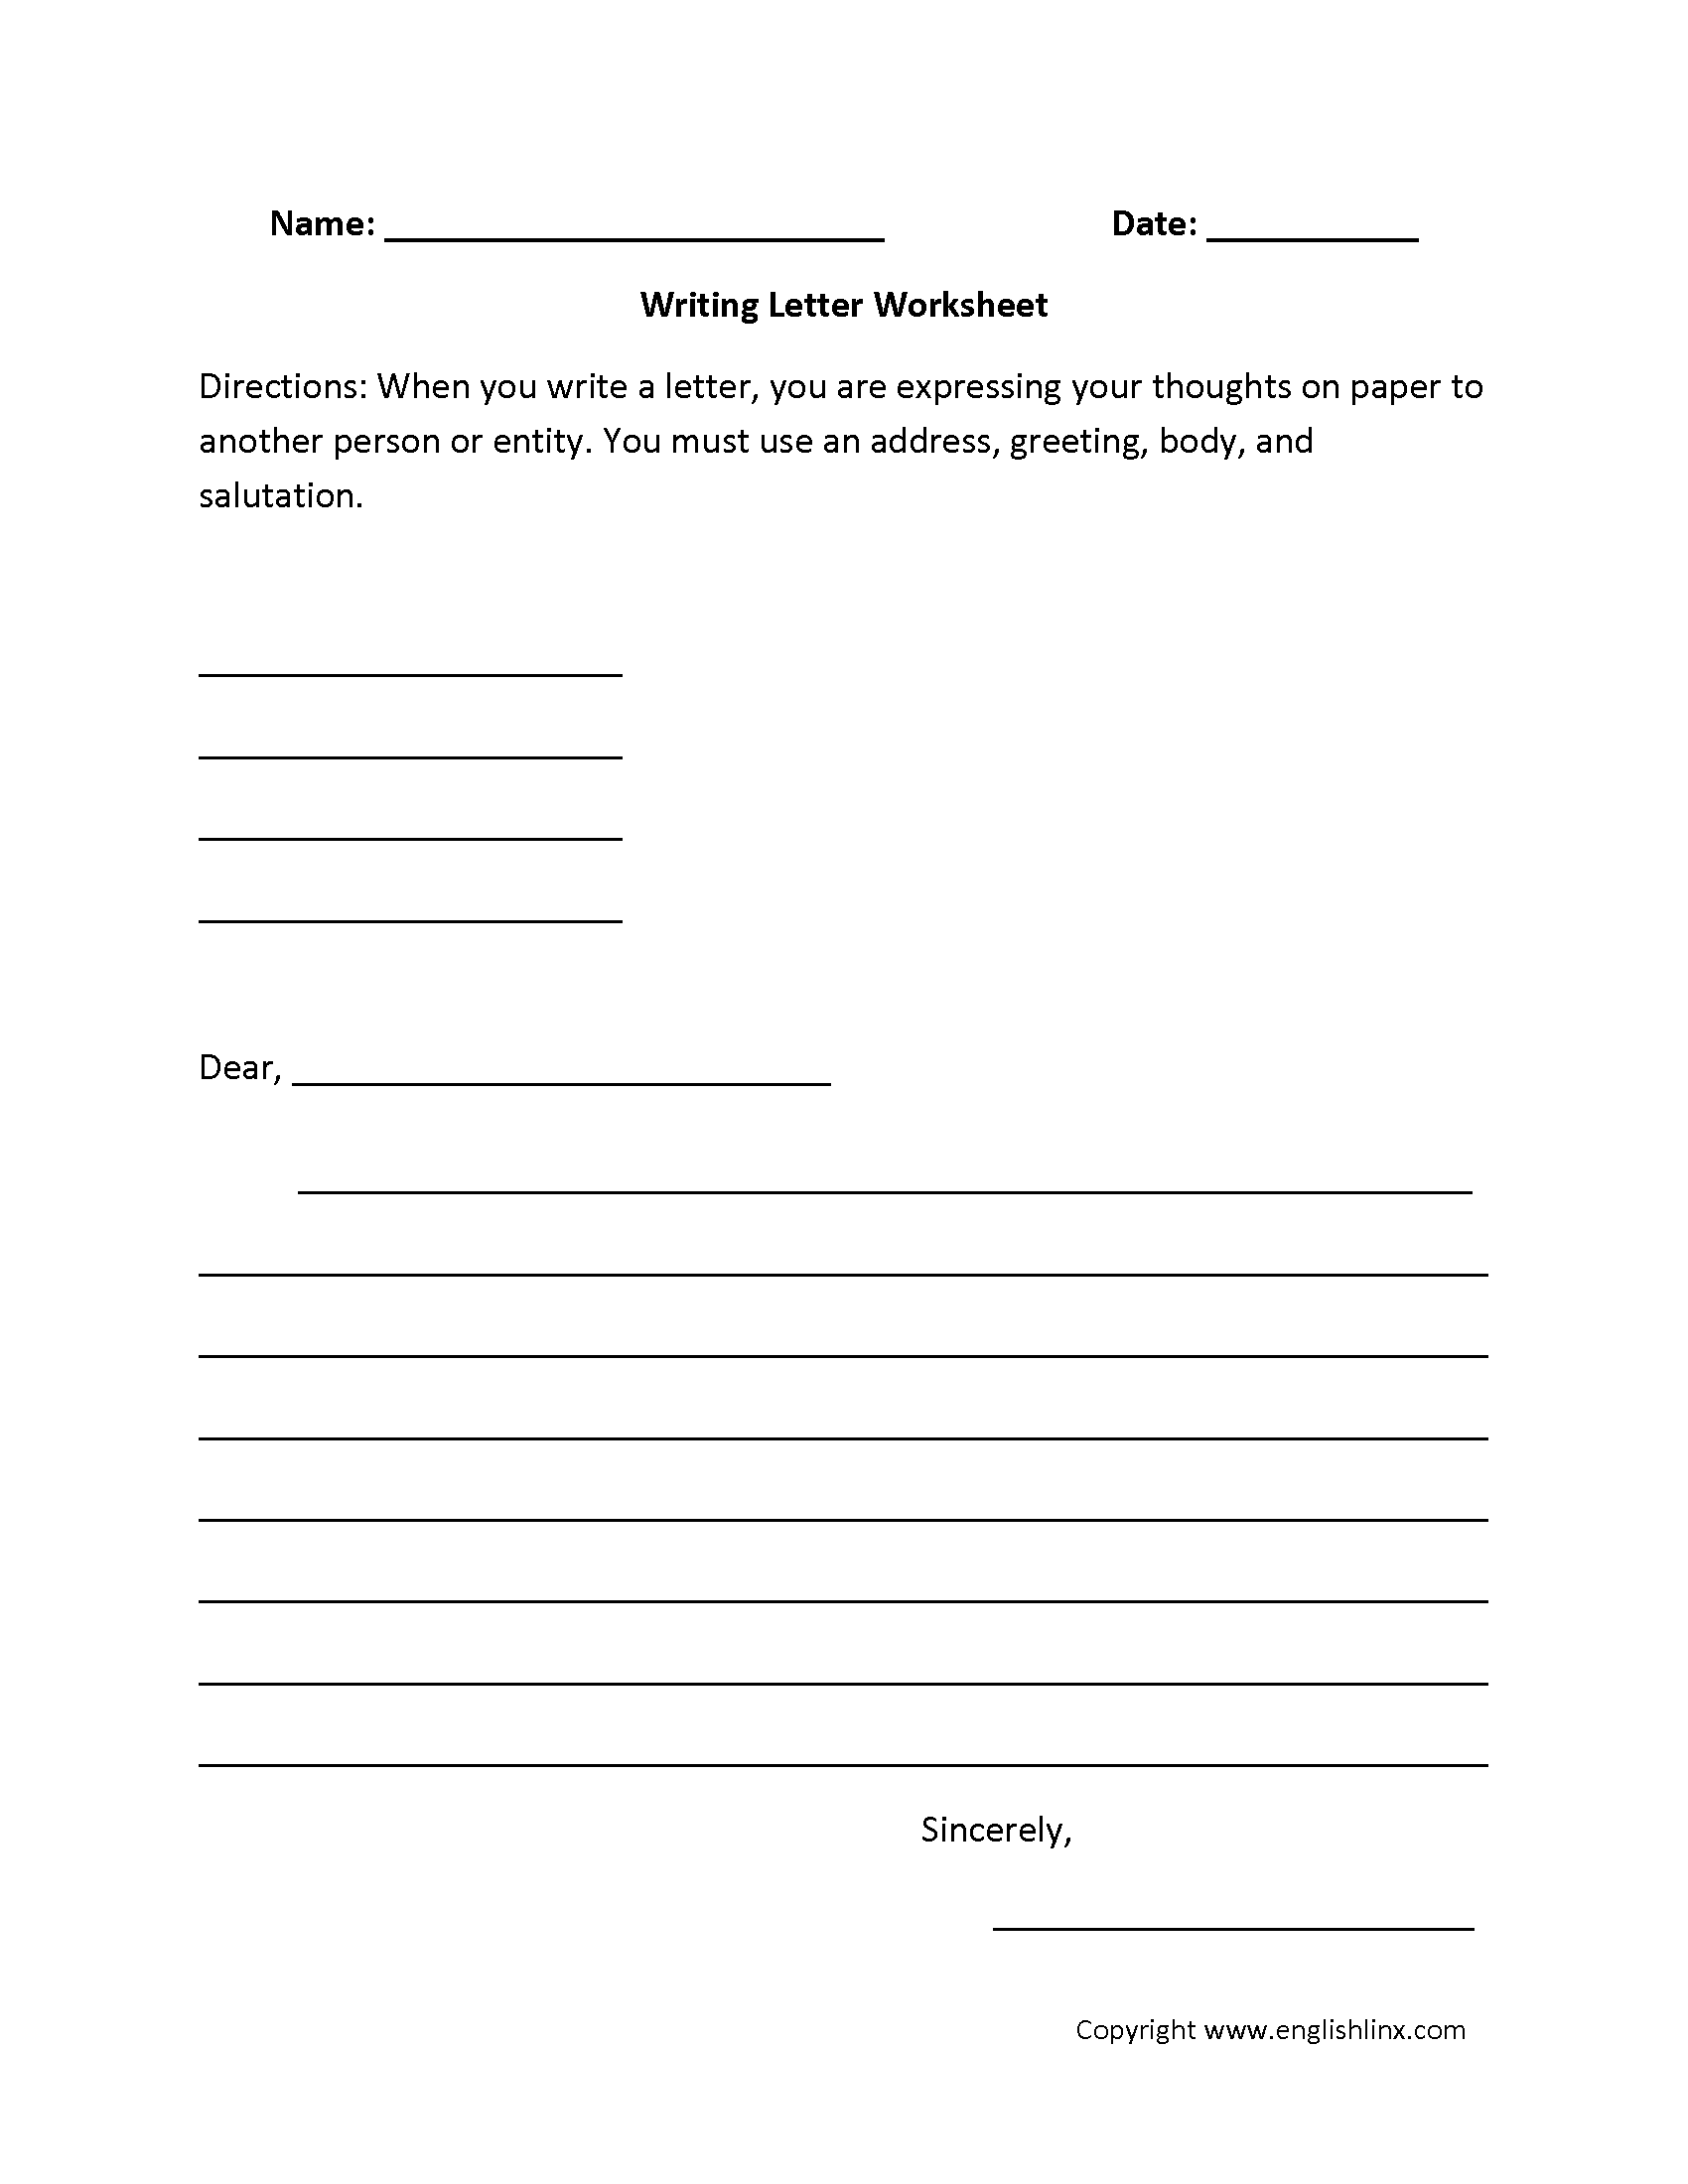 letter-writing-worksheets-writing-letter-writing-worksheets